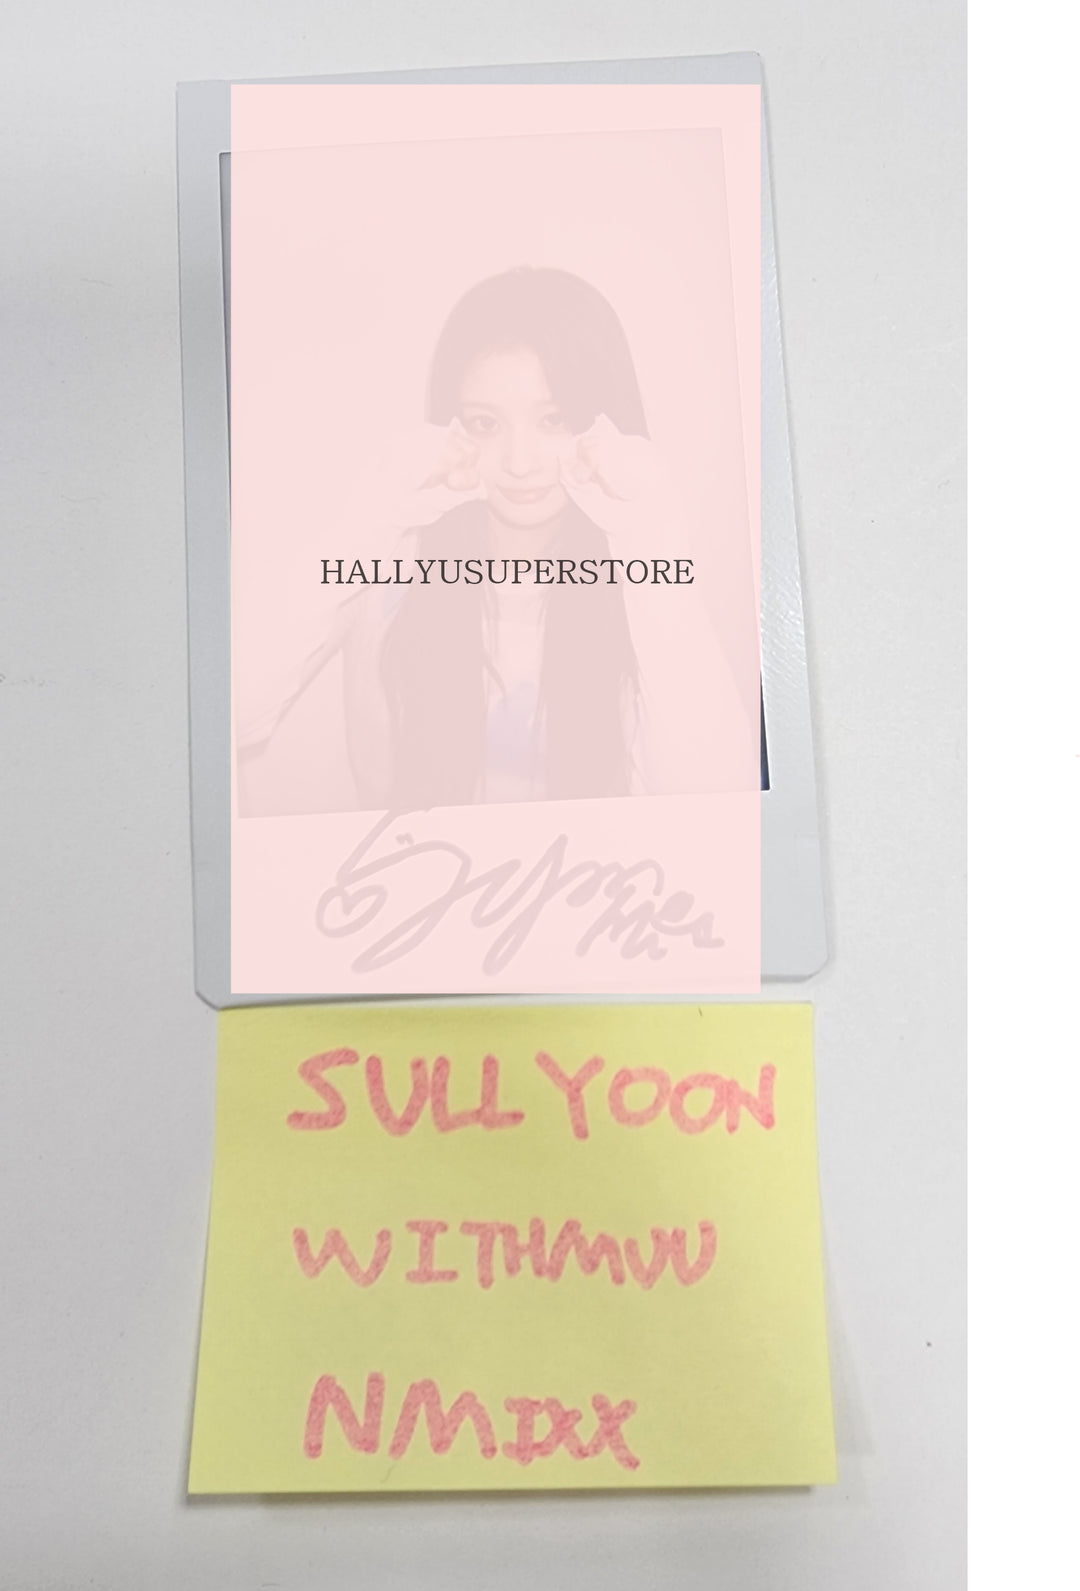 Sullyoon (Of NMIXX) "A Midsummer NMIXX’s Dream" - Hand Autographed(Signed) Polaroid